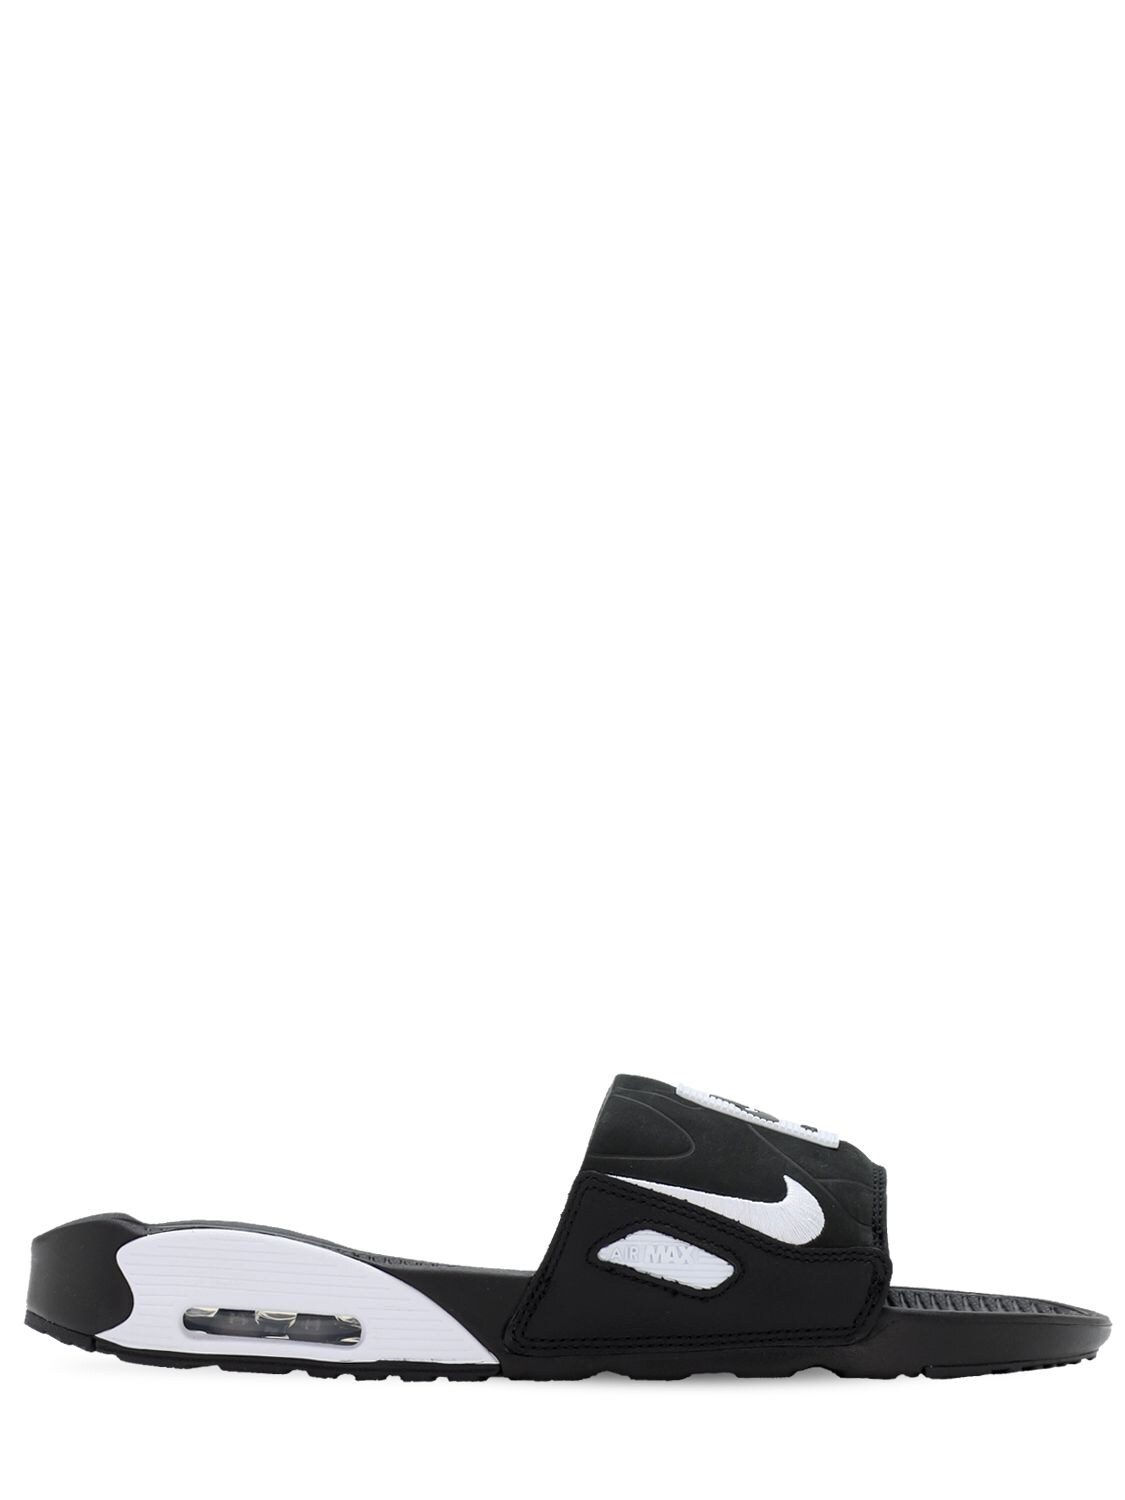 Buy Air Max 90 Slide Sandals for Womens 